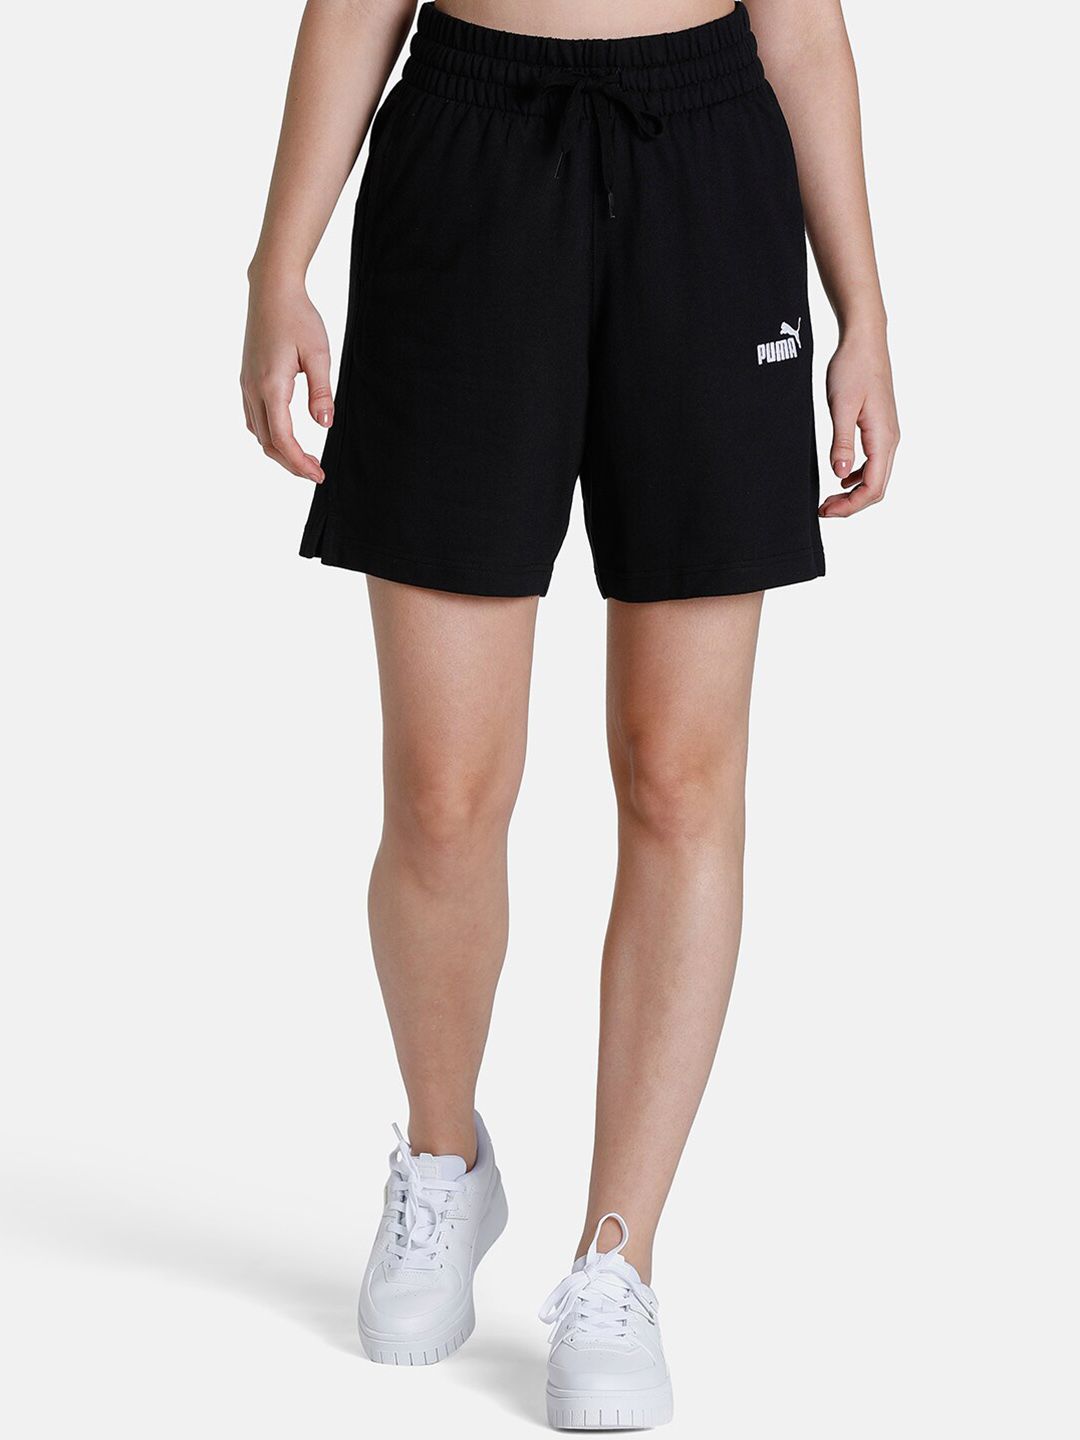 Puma Women Solid Cotton Shorts Price in India